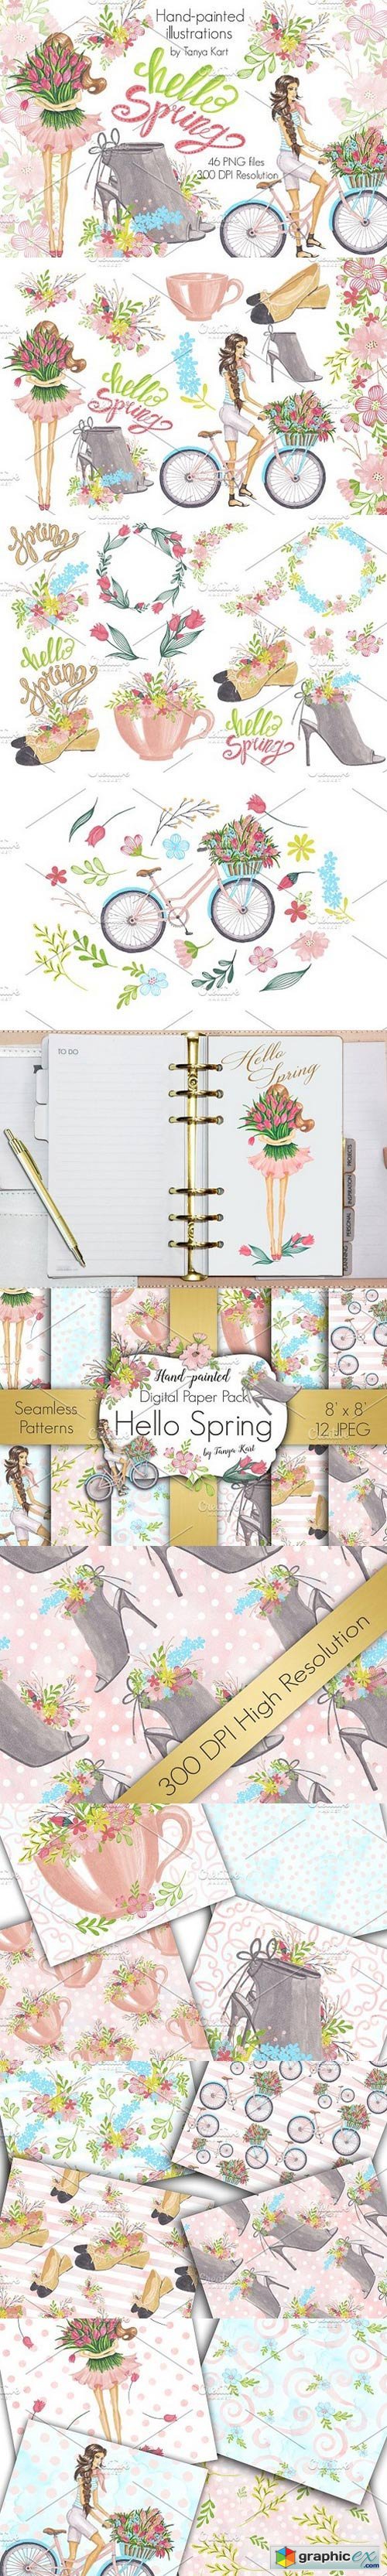 Hello Spring Hand-painted Collection